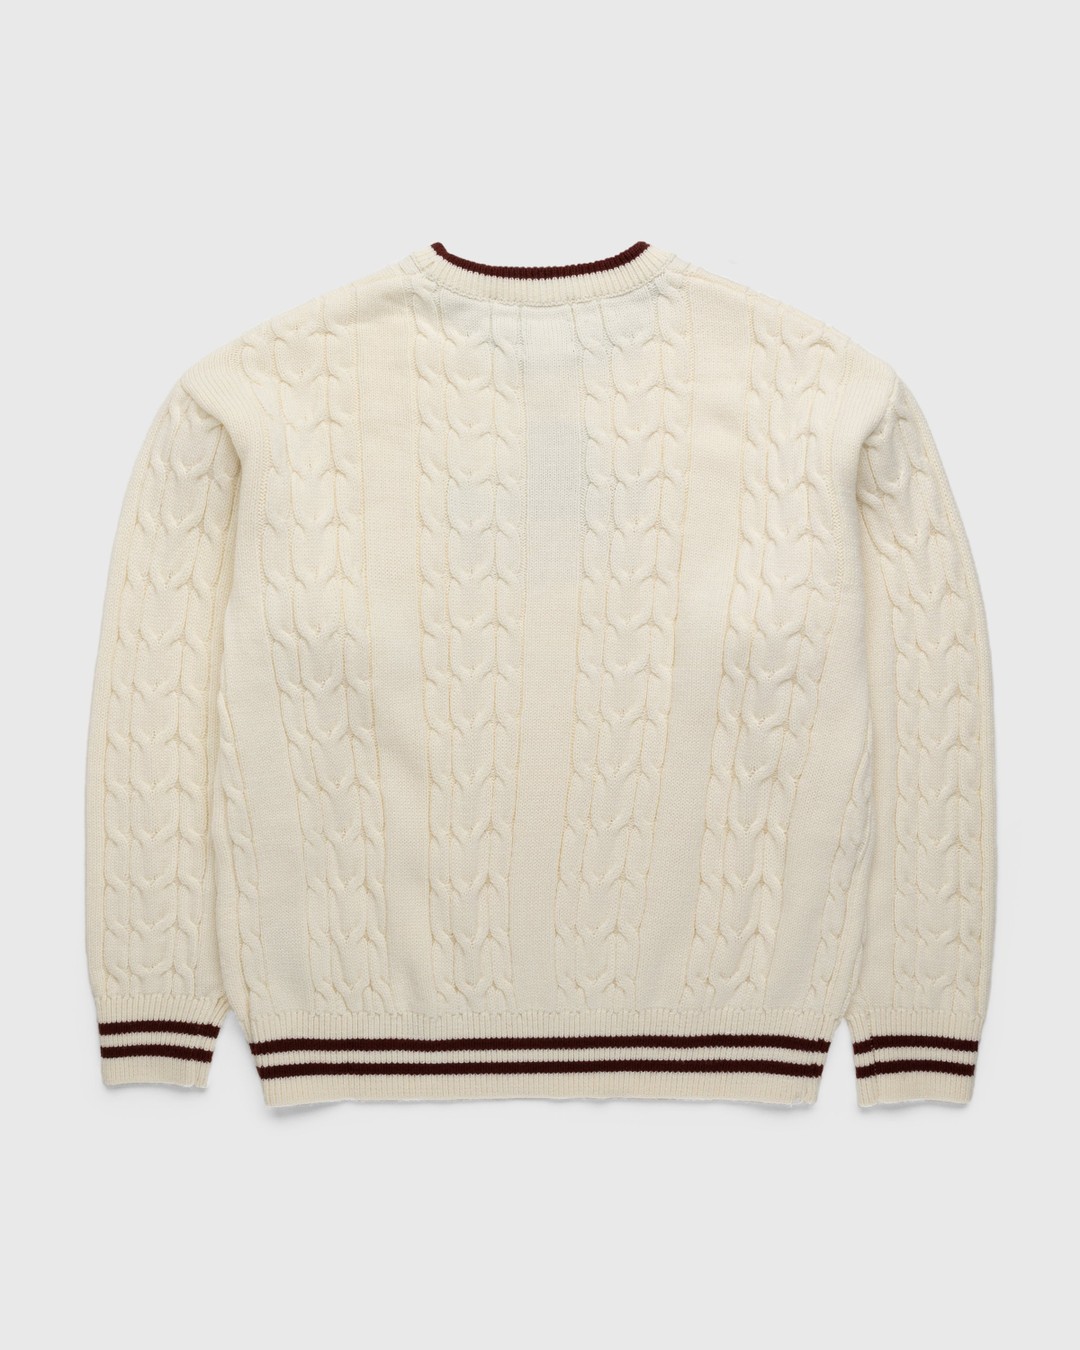 Patta – Premium Cable Knitted Sweater Vanilla Ice - Knitwear - White - Image 2